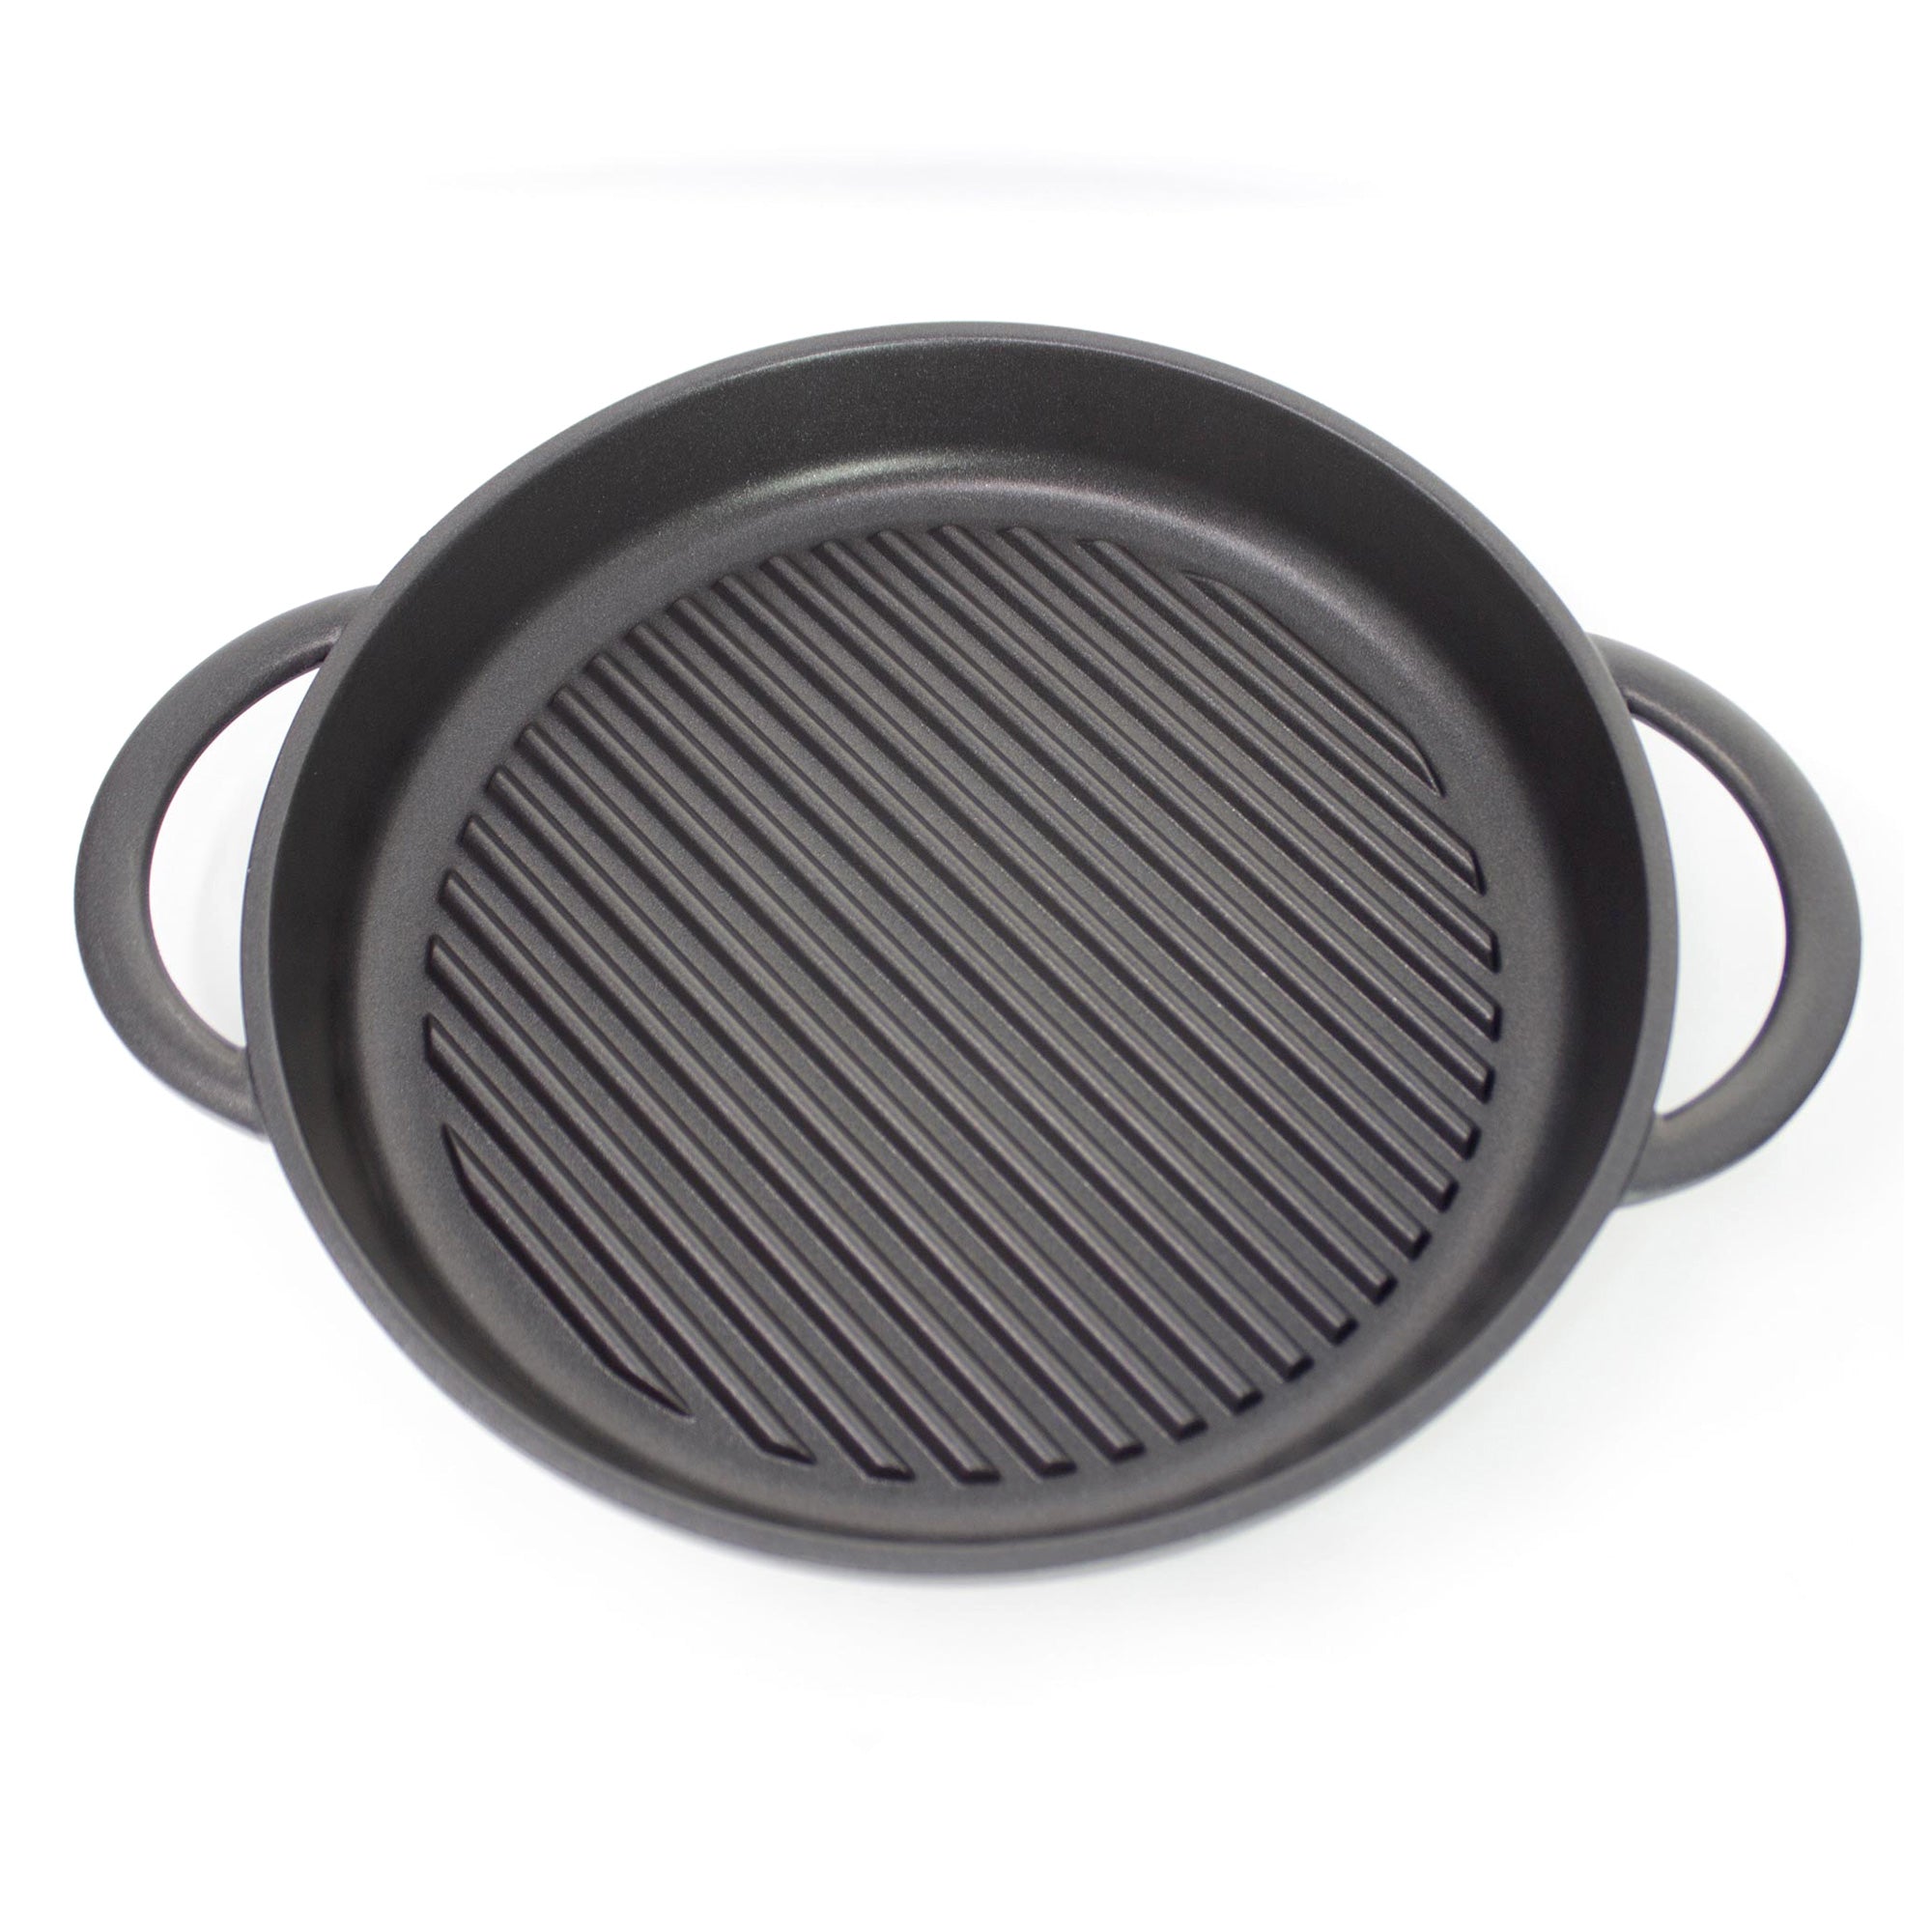  Jean-Patrique The Whatever Pan Cast Aluminum Griddle Pan for  Stove Top - Lighter than Cast Iron Skillet Pancake Griddle with Lid -  Nonstick Stove Top Grill Pan (11.8) : Clothing, Shoes